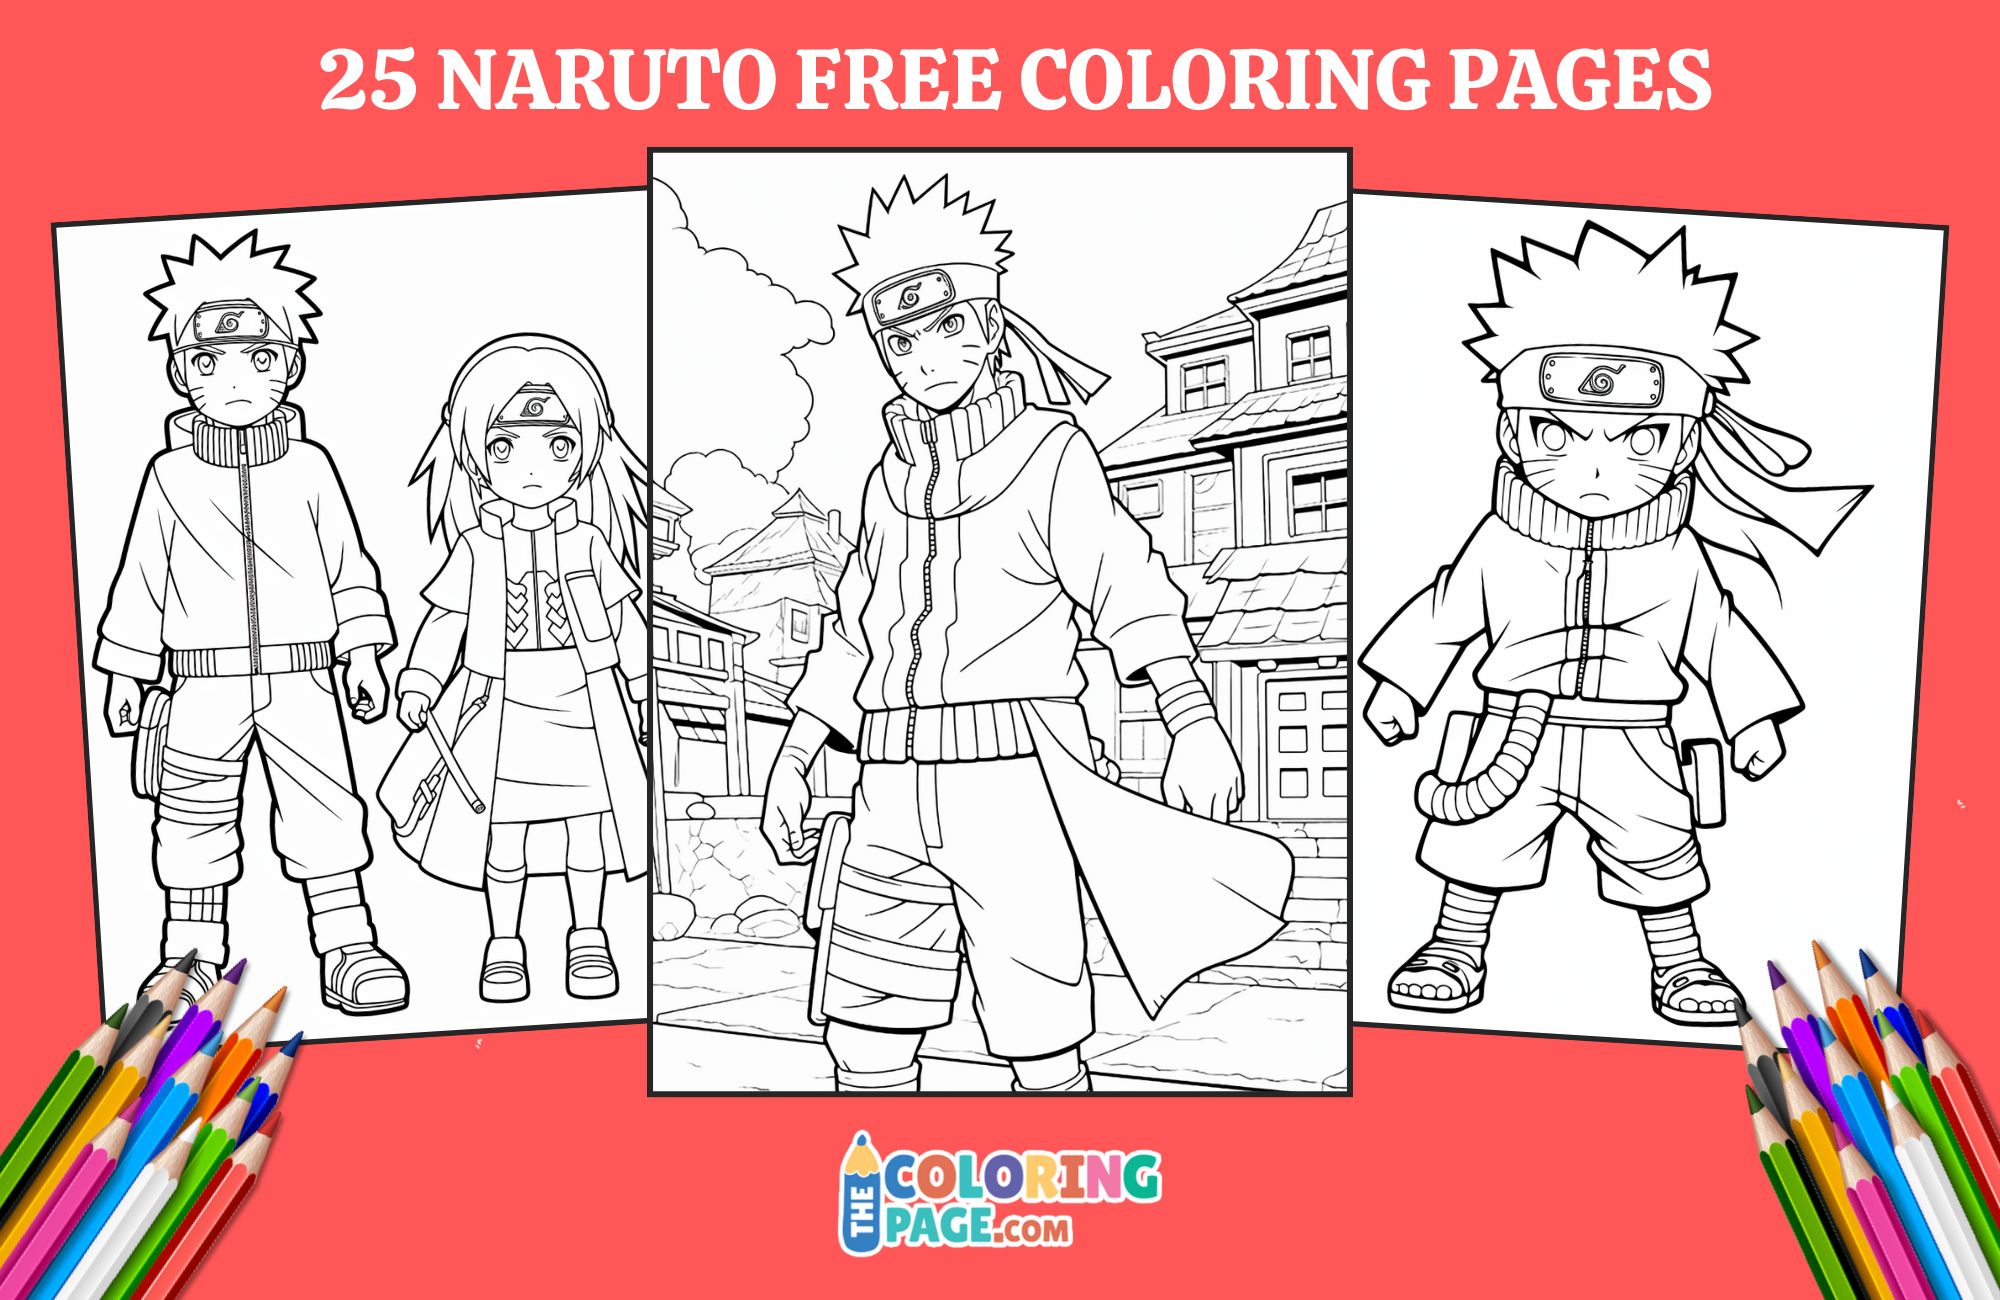 25 Naruto Coloring Pages for kids